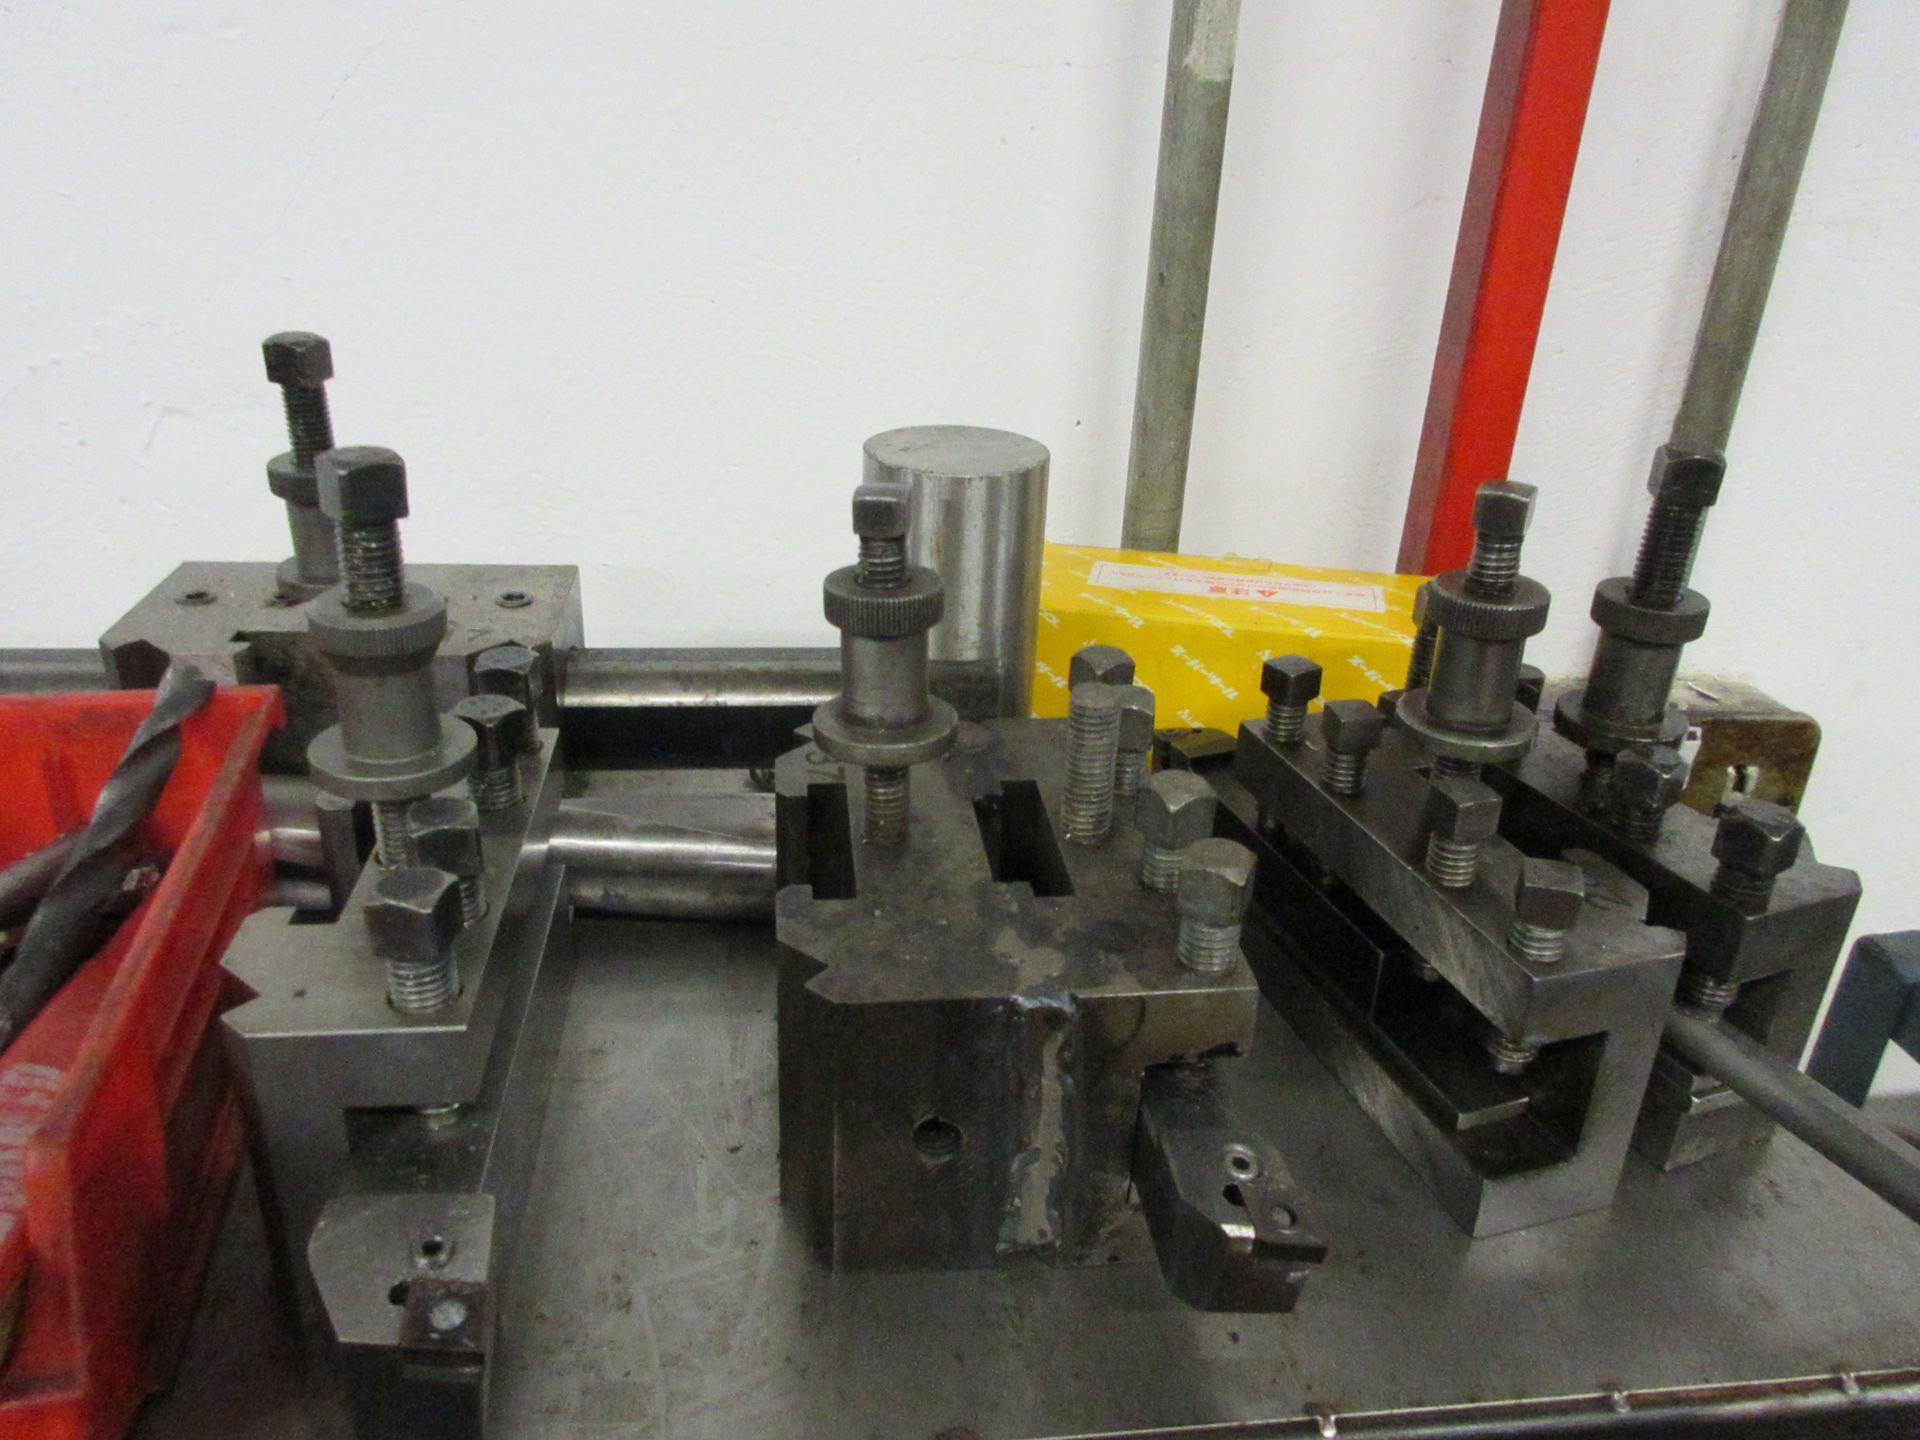 Quantity of various tool posts with associated attachments, including drill bits, cutting tools, - Image 4 of 6